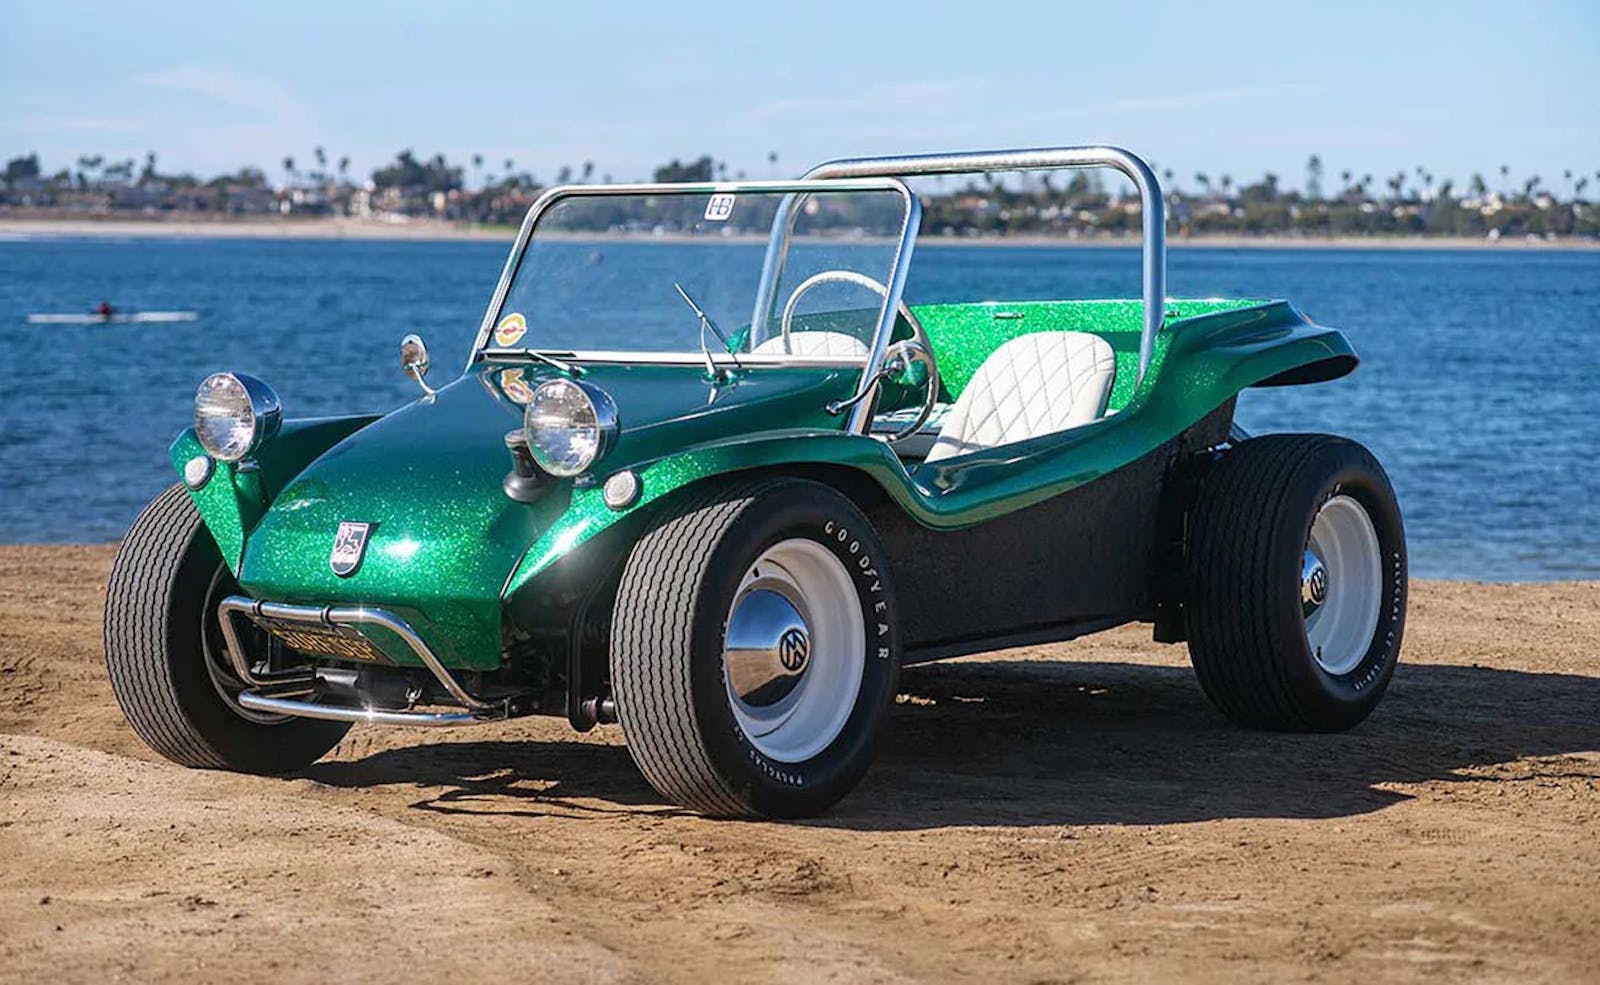 Classic Meyers Manx Dune Buggy Reborn With New Diy Kit - Hagerty Media